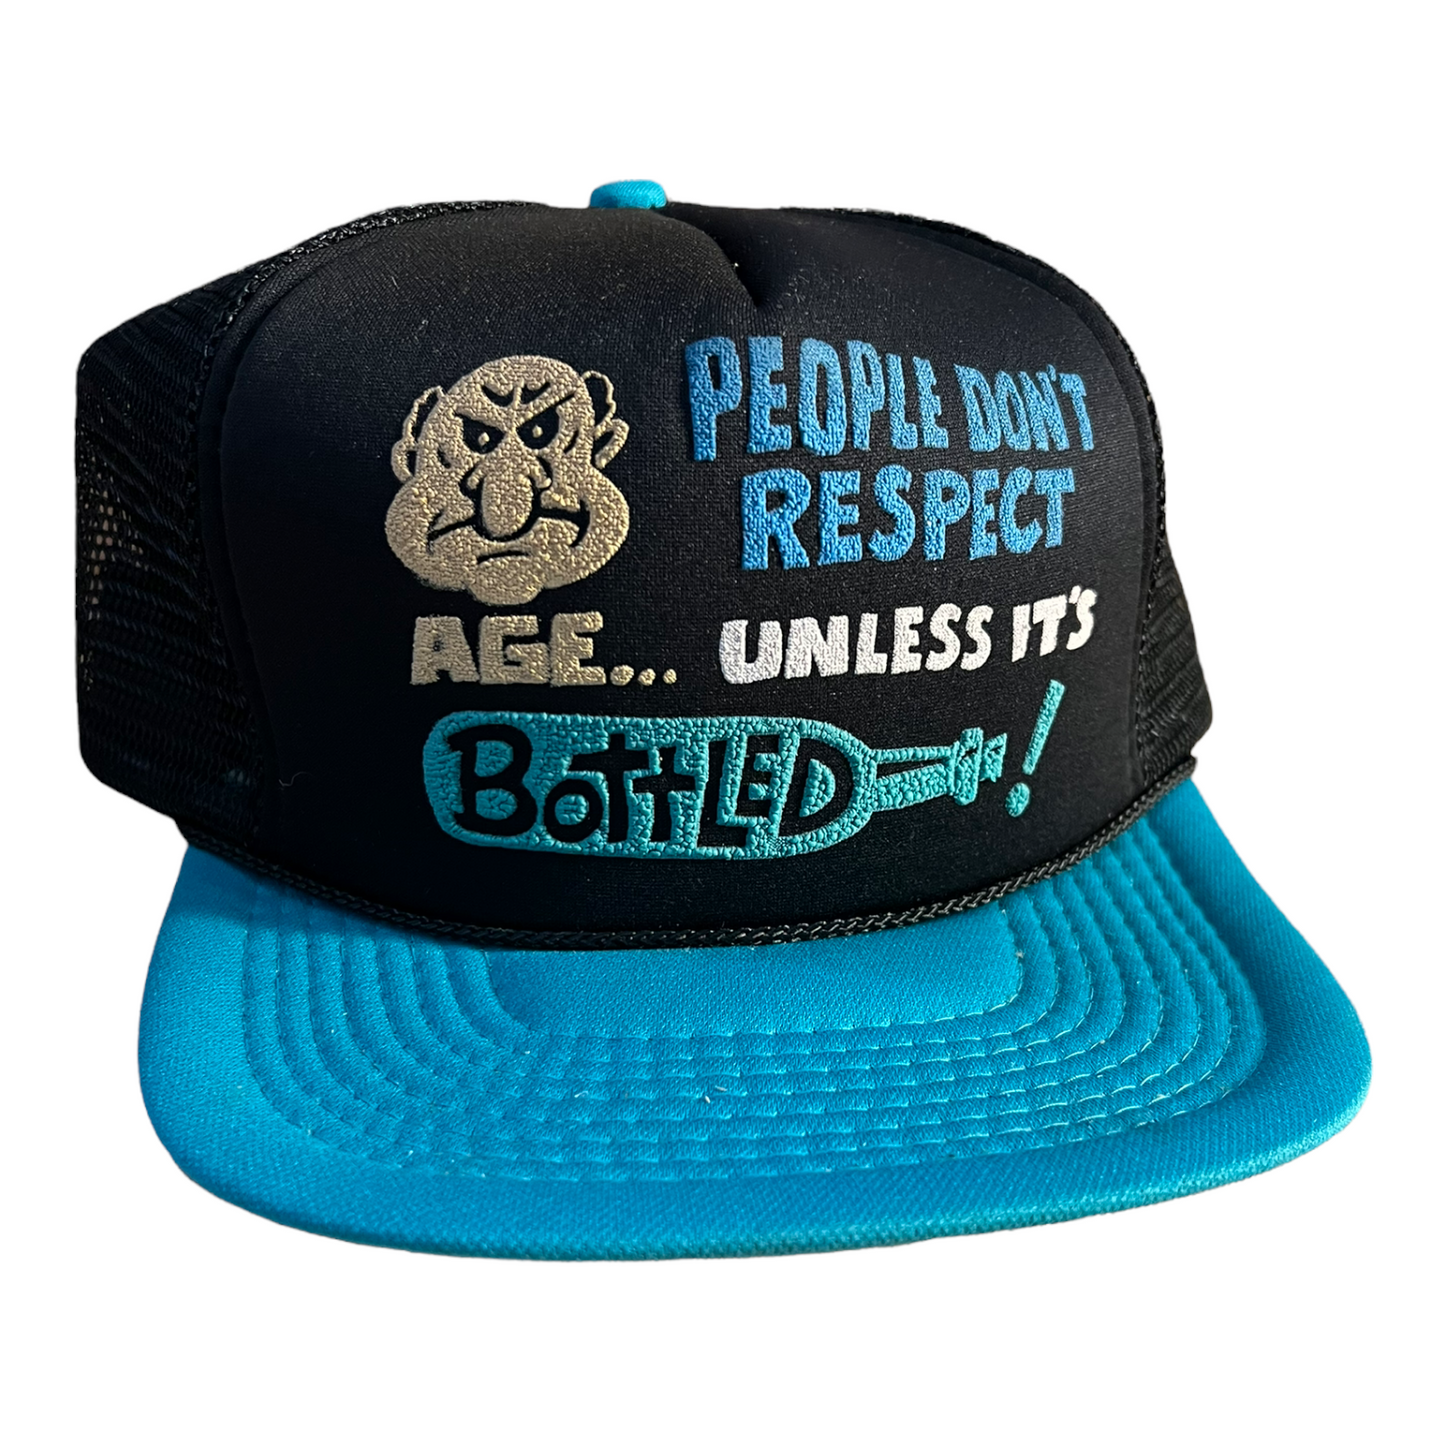 Vintage People Don't Respect Age...Unless Its Bottled Trucker Hat Funny Trucker Hat Black/White